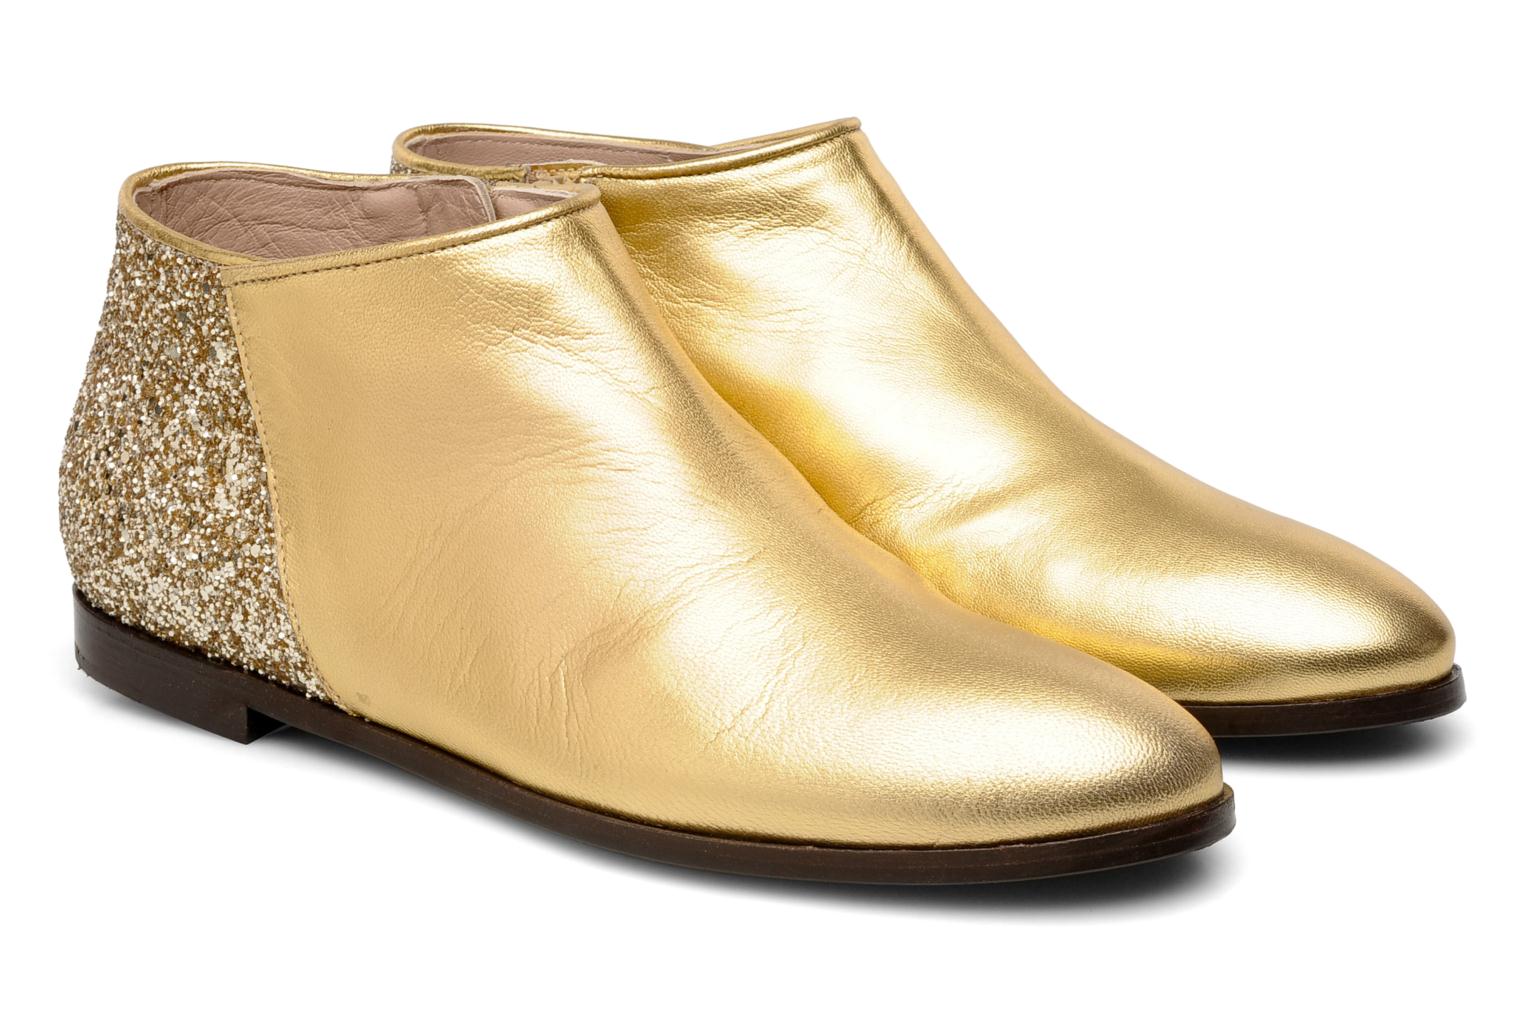 Jancovek Ringo (Bronze and Gold) - Ankle boots chez Sarenza (104598)